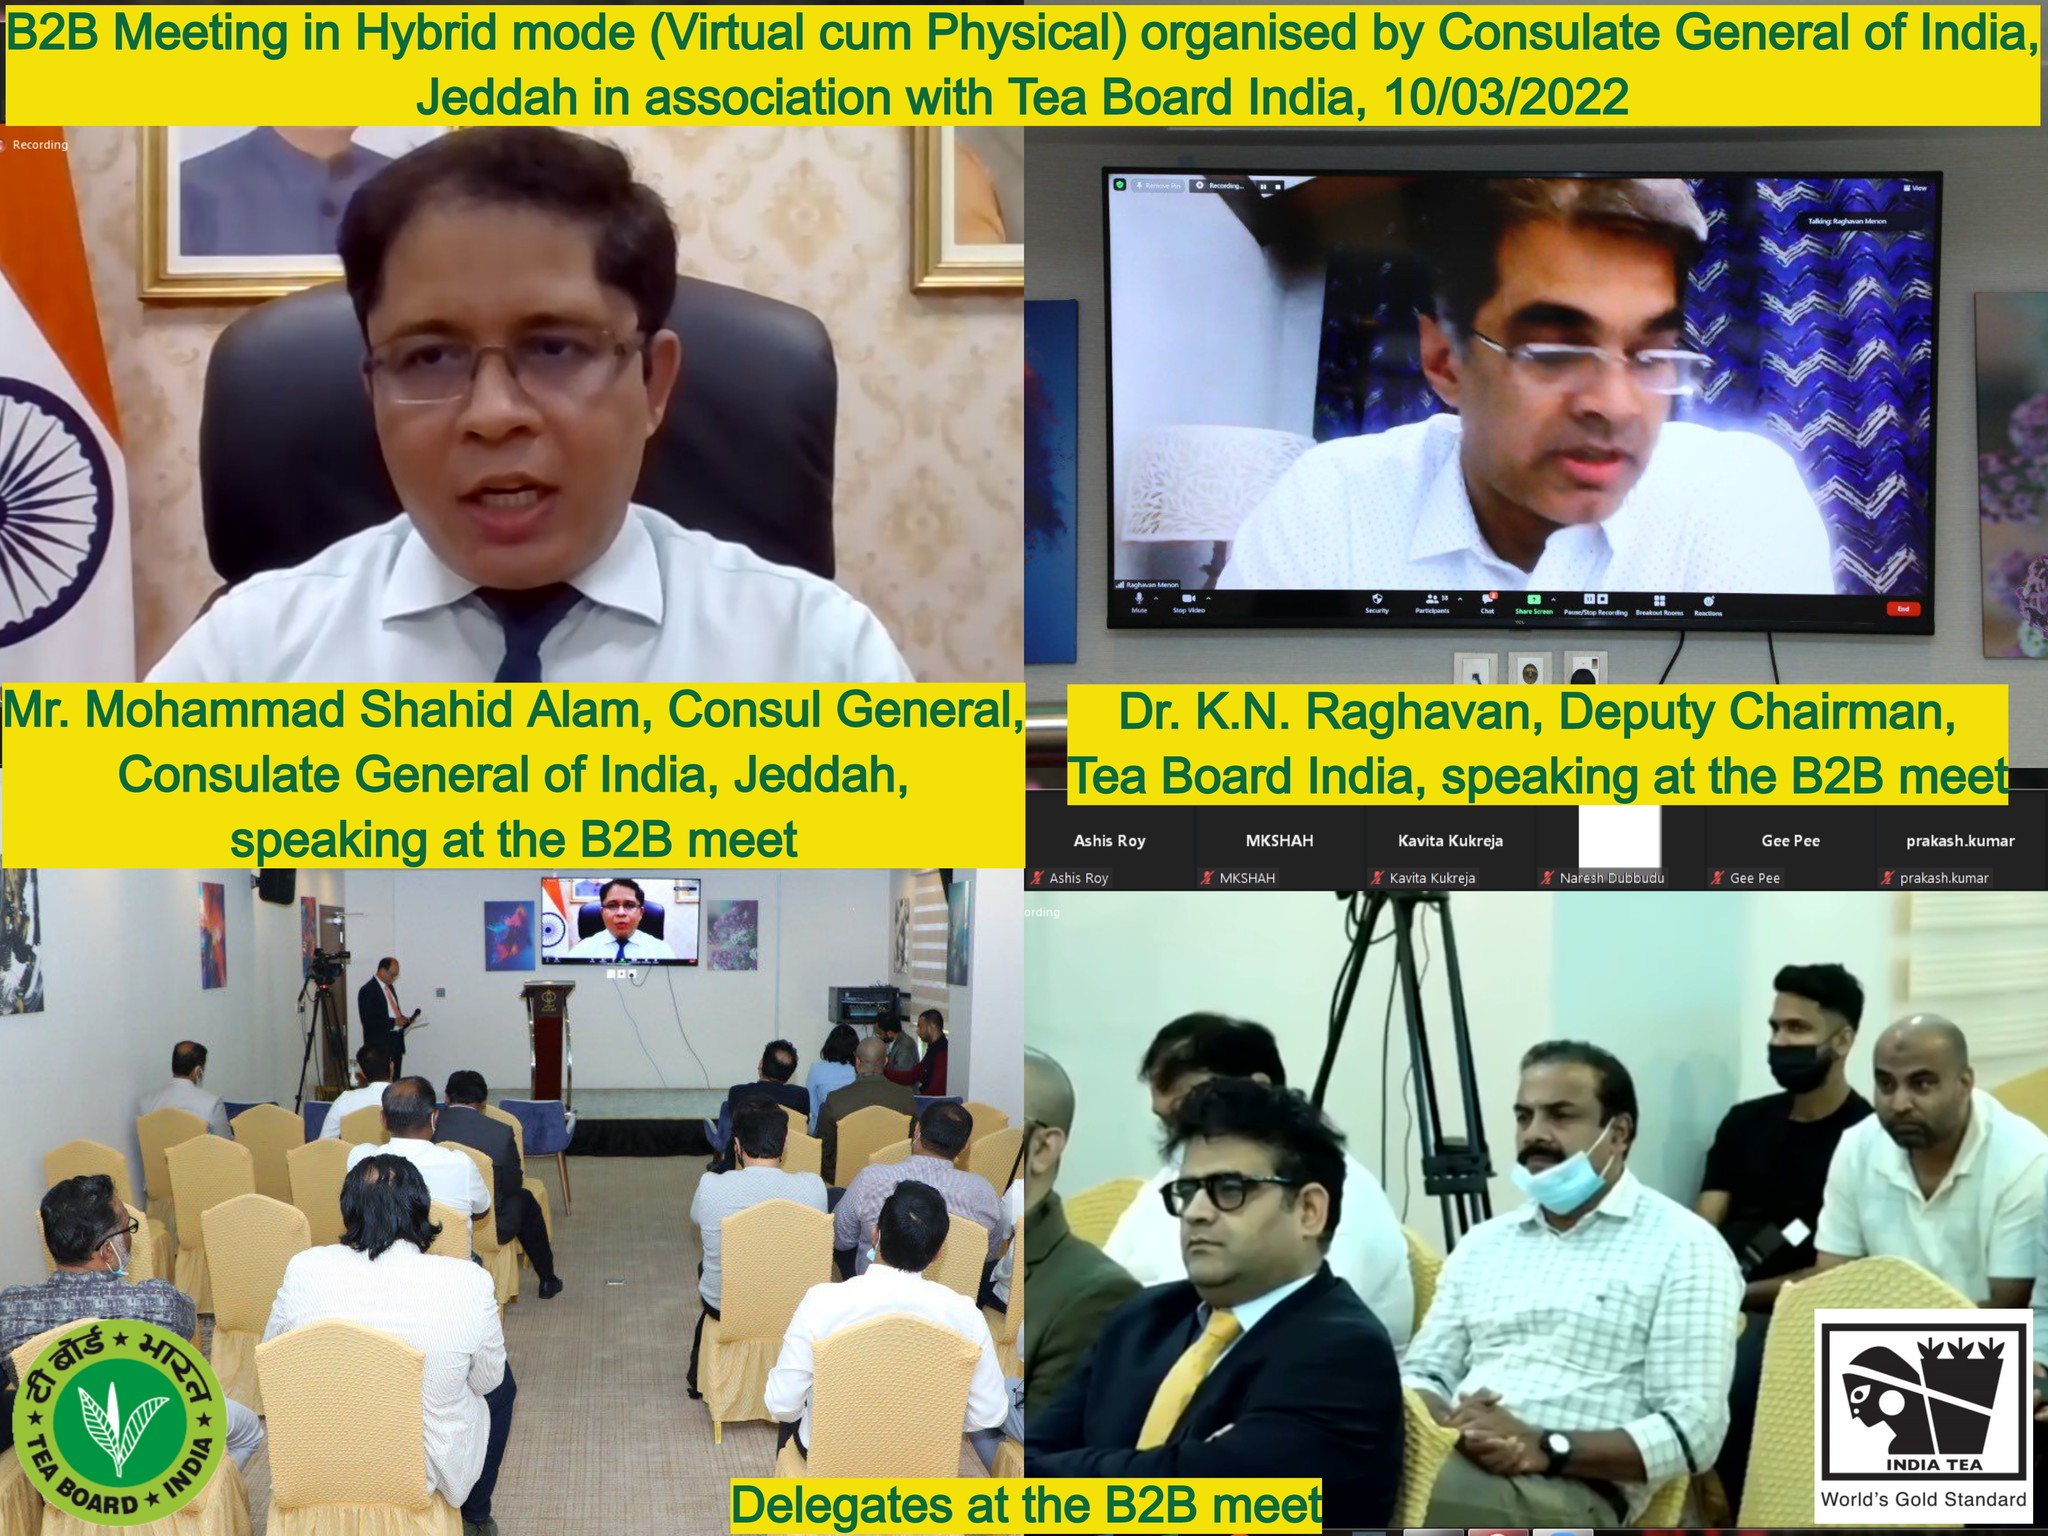 B2B Meeting in Hybrid mode (Virtual cum Physical) organised by Consulate General of India, Jeddah in association with Tea Board India, 10-03-2022